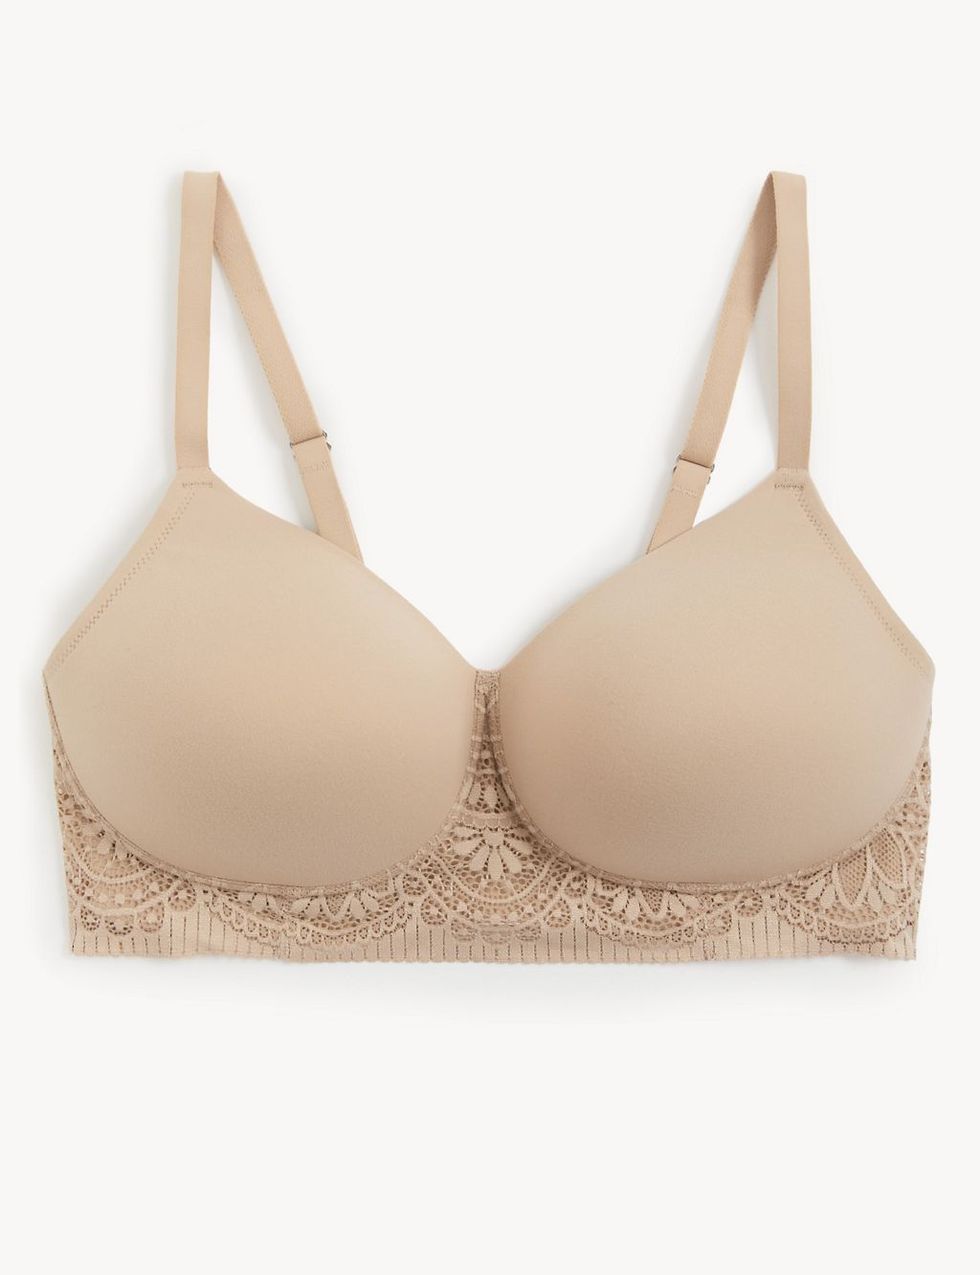 Marks & Spencer has updated its post-surgery bra range